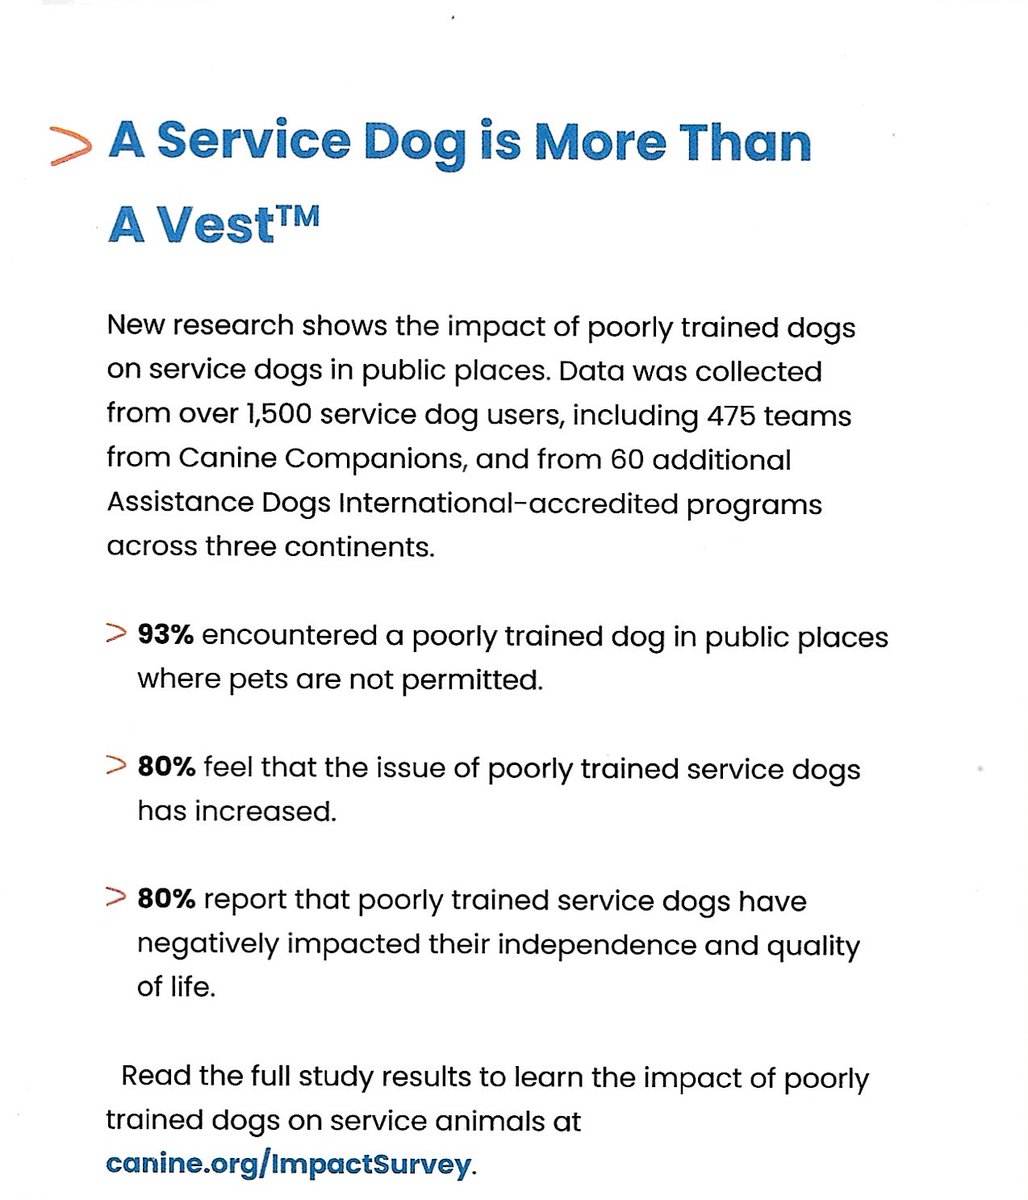 Remember...a service dog is MORE than a vest...
#caninecompanions #servicedog